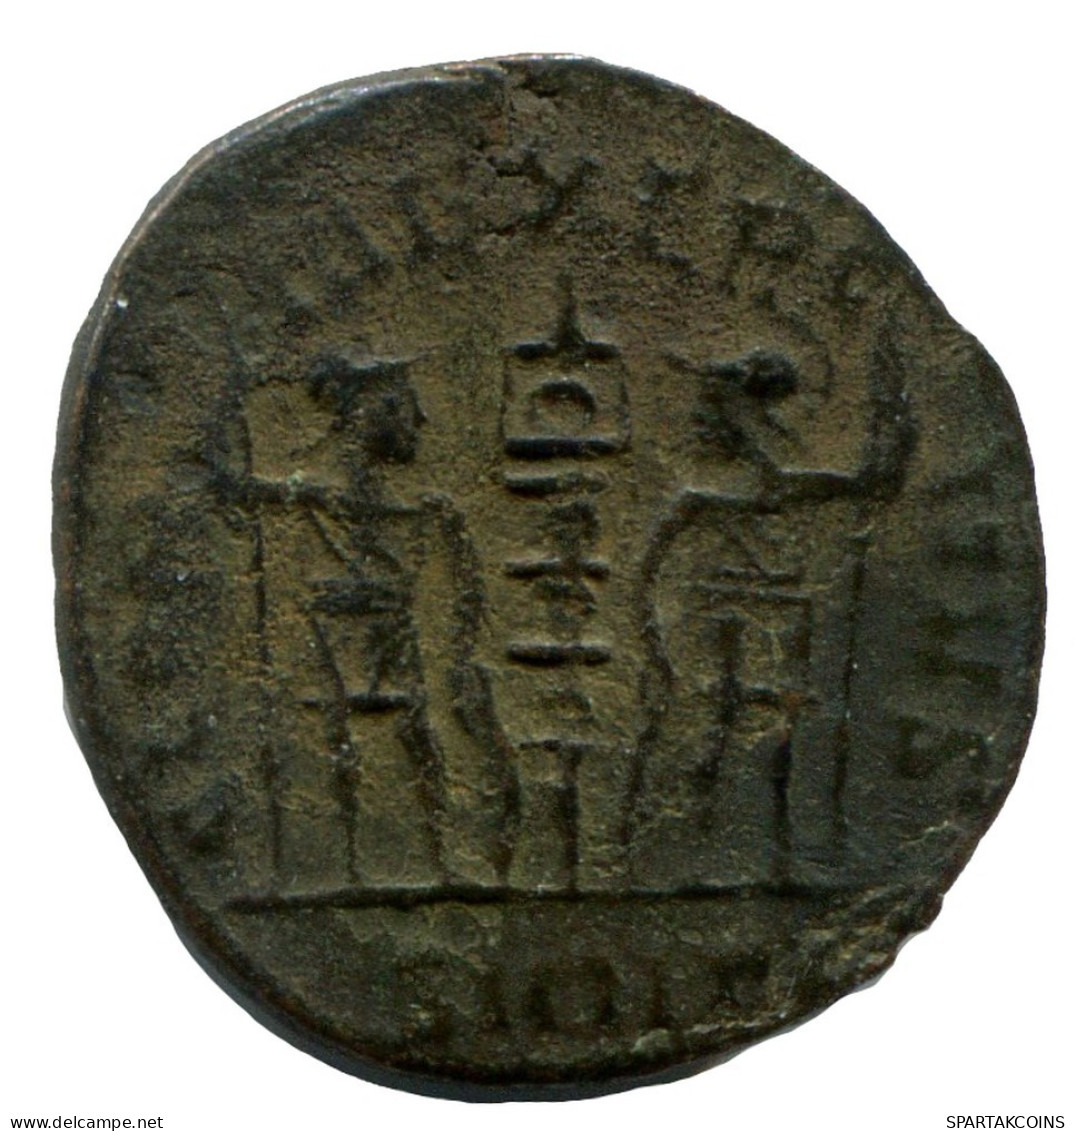 CONSTANTINE I MINTED IN NICOMEDIA FOUND IN IHNASYAH HOARD EGYPT #ANC10897.14.U.A - The Christian Empire (307 AD Tot 363 AD)